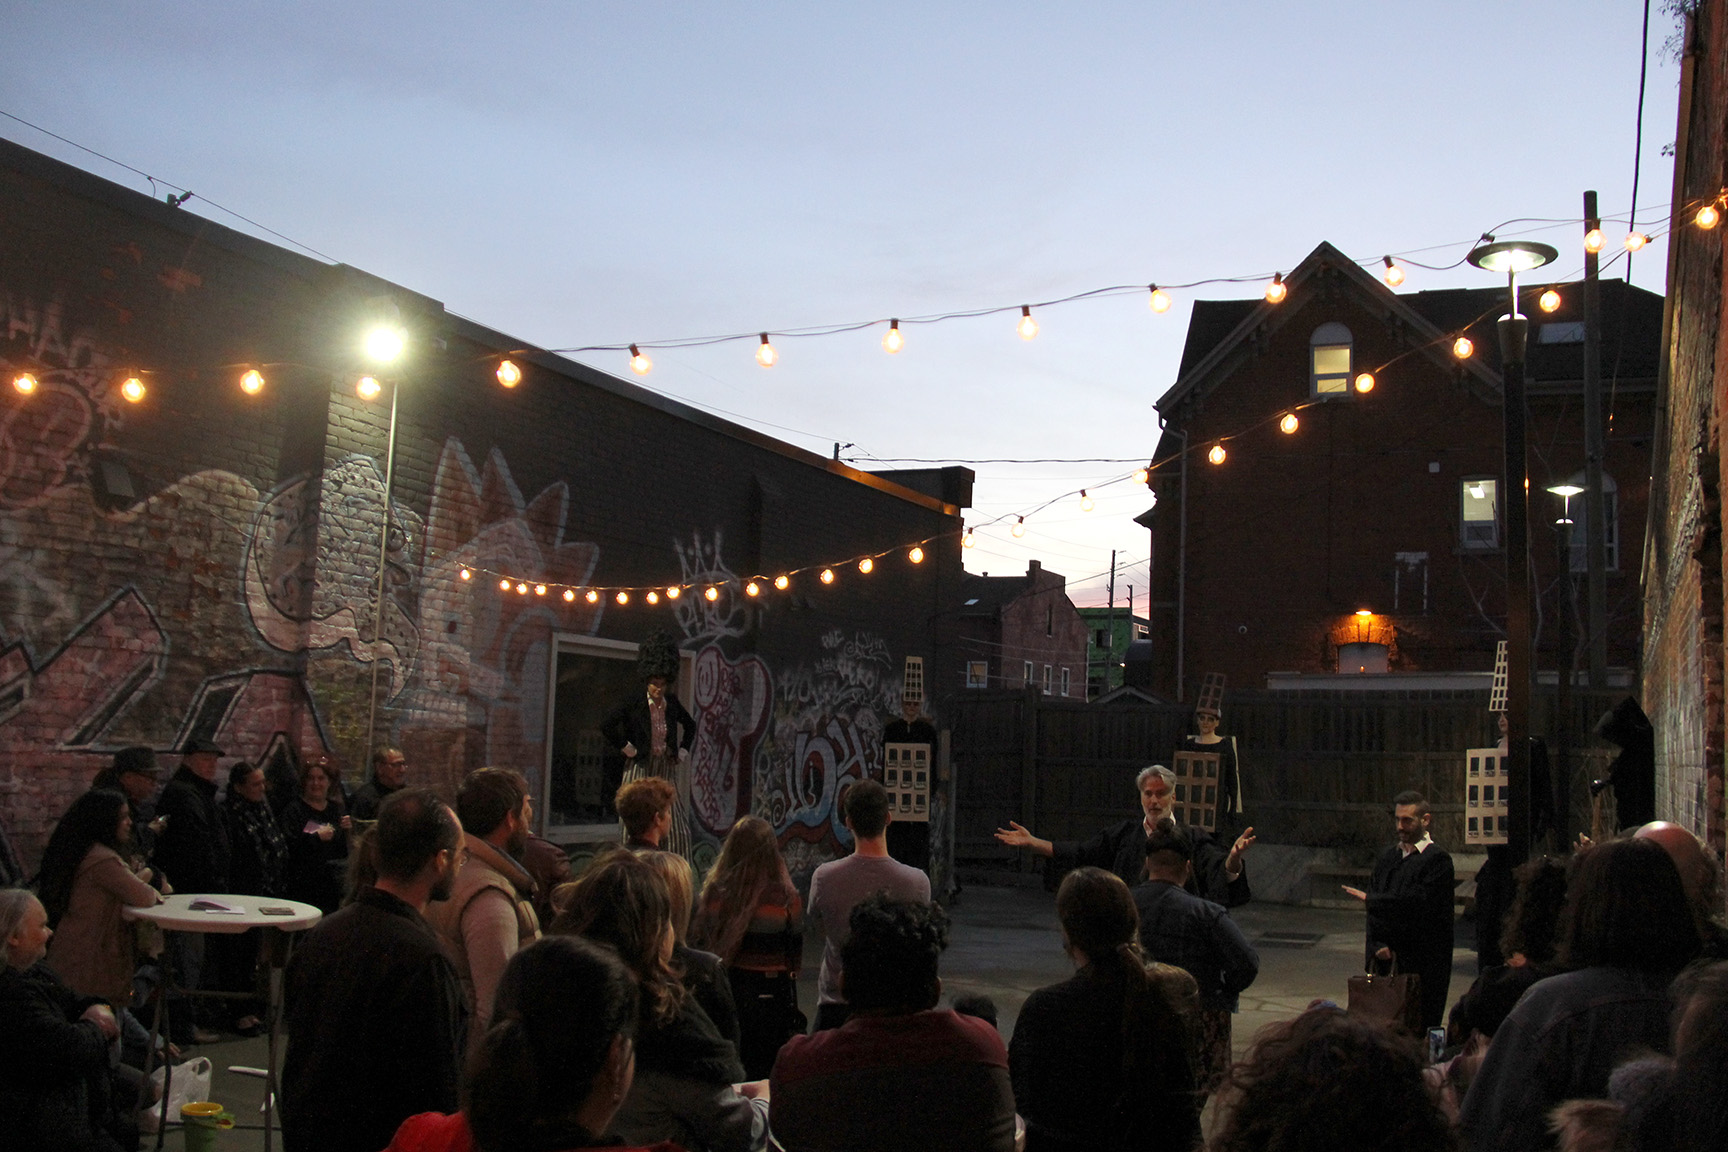 A photo of the Inc.’s courtyard at dusk, framed by the silhouette of the Notre Dame House in the background. There are strings of warm, spherical lights attached to the brick walls on either side of the courtyard. There are 20 or so people seated on fold-out chairs, watching a performance. The performers are dressed in black robes.